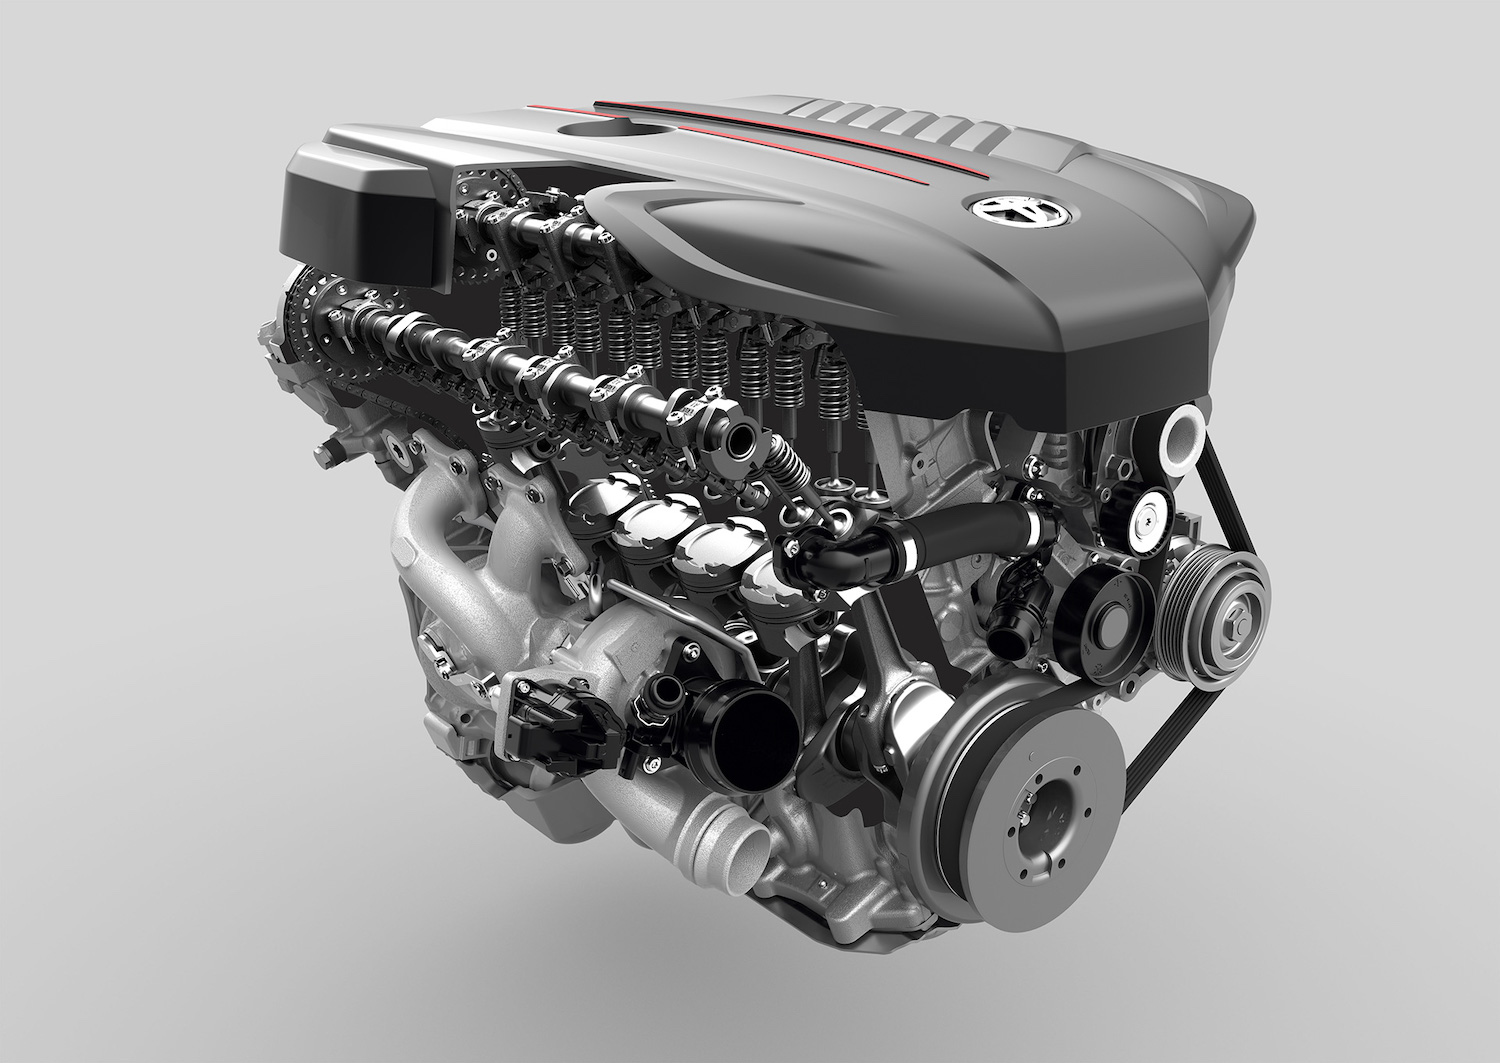 Promo photo of Toyota's new straight-six performance engine from its latest Supra sports car.